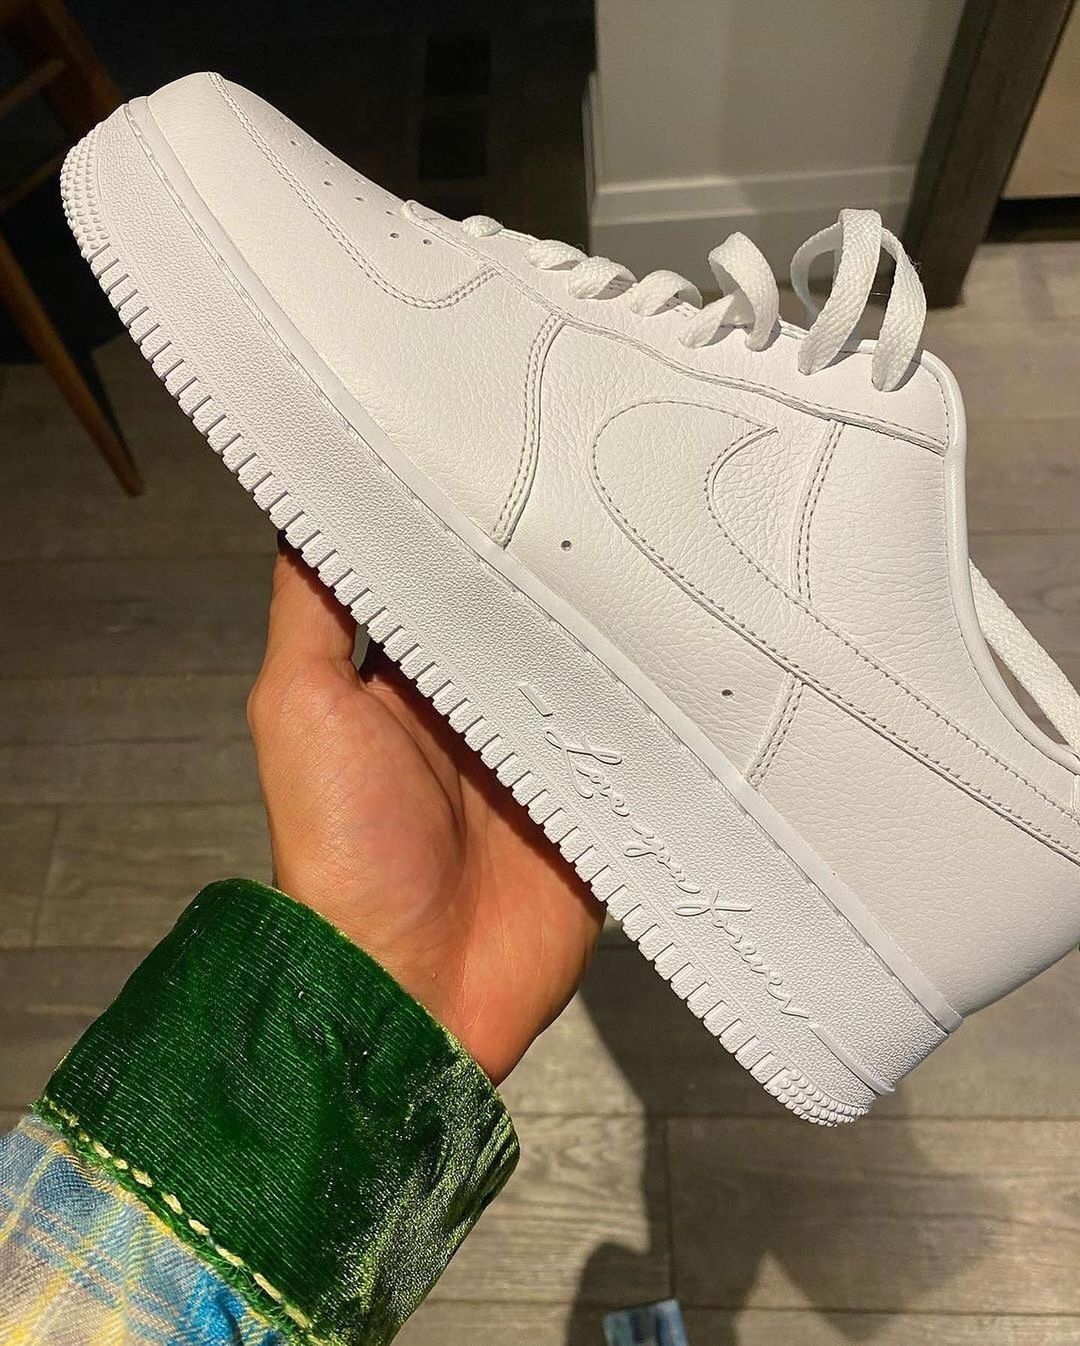 Images of a Drake X Nike Air Force 1 Collaboration Emerge